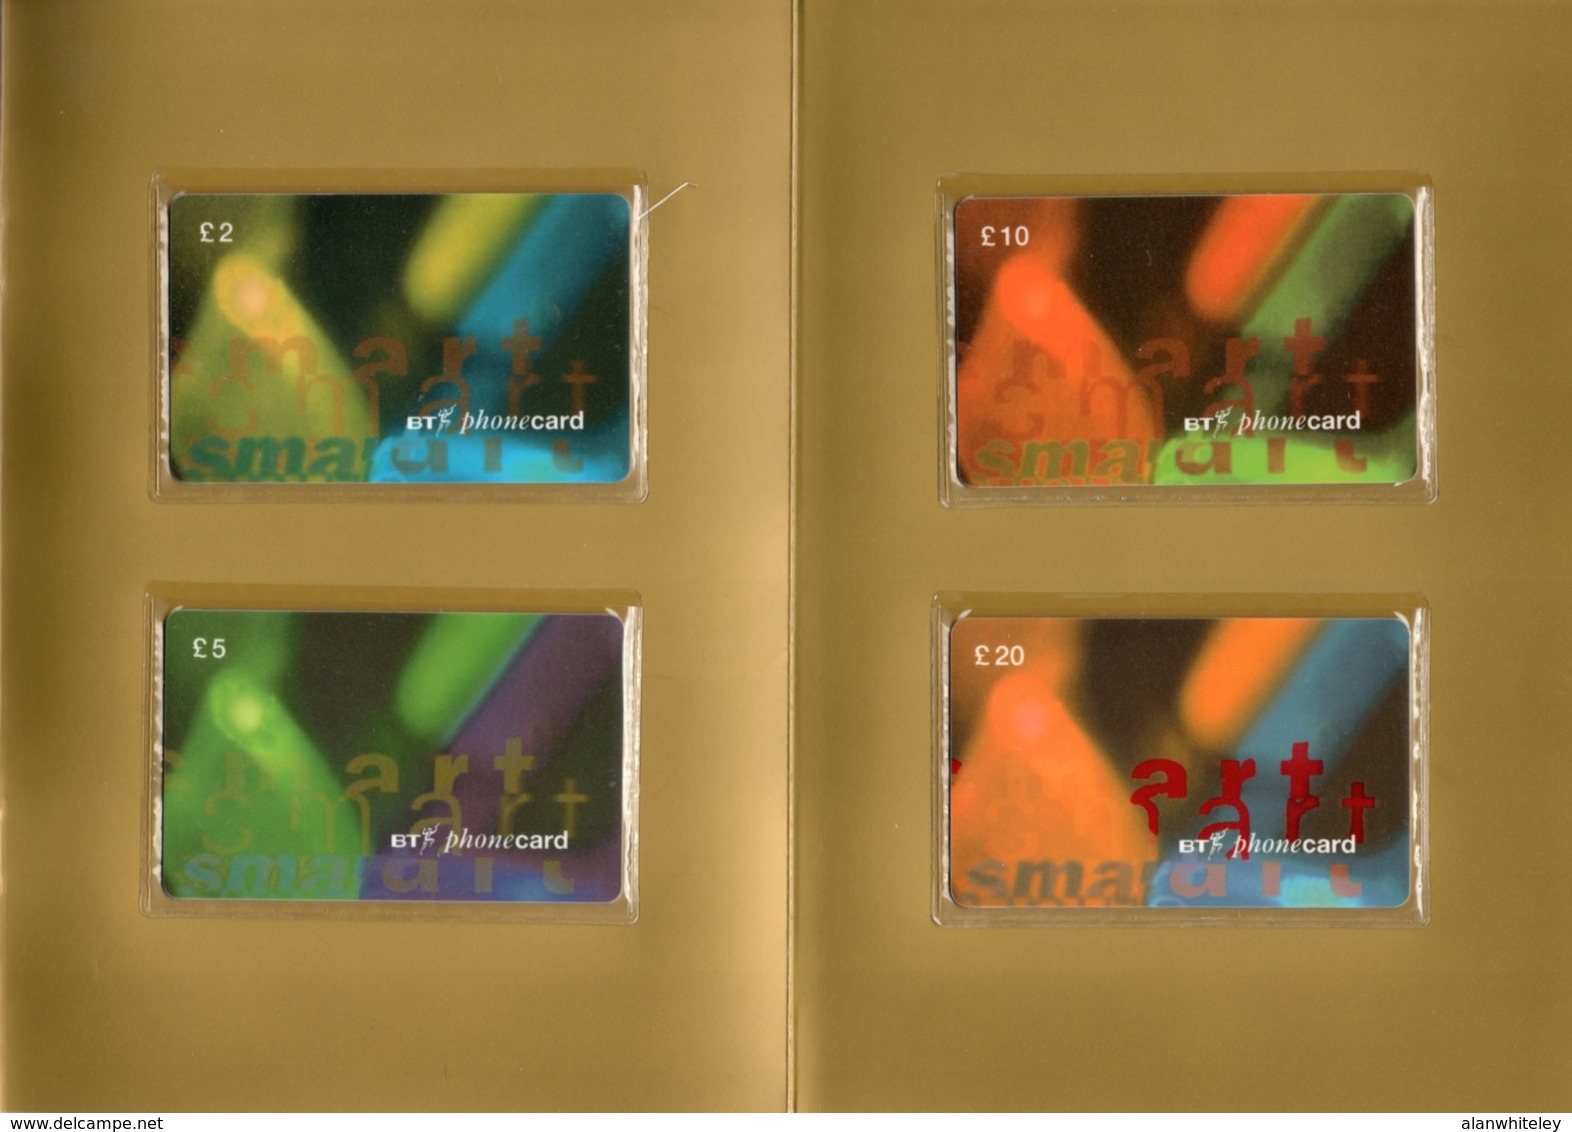 GREAT BRITAIN 1995 Smart Card Trial/Thank You: Presentation Pack Containing 4 Phonecards MINT/UNUSED - BT Test & Trials